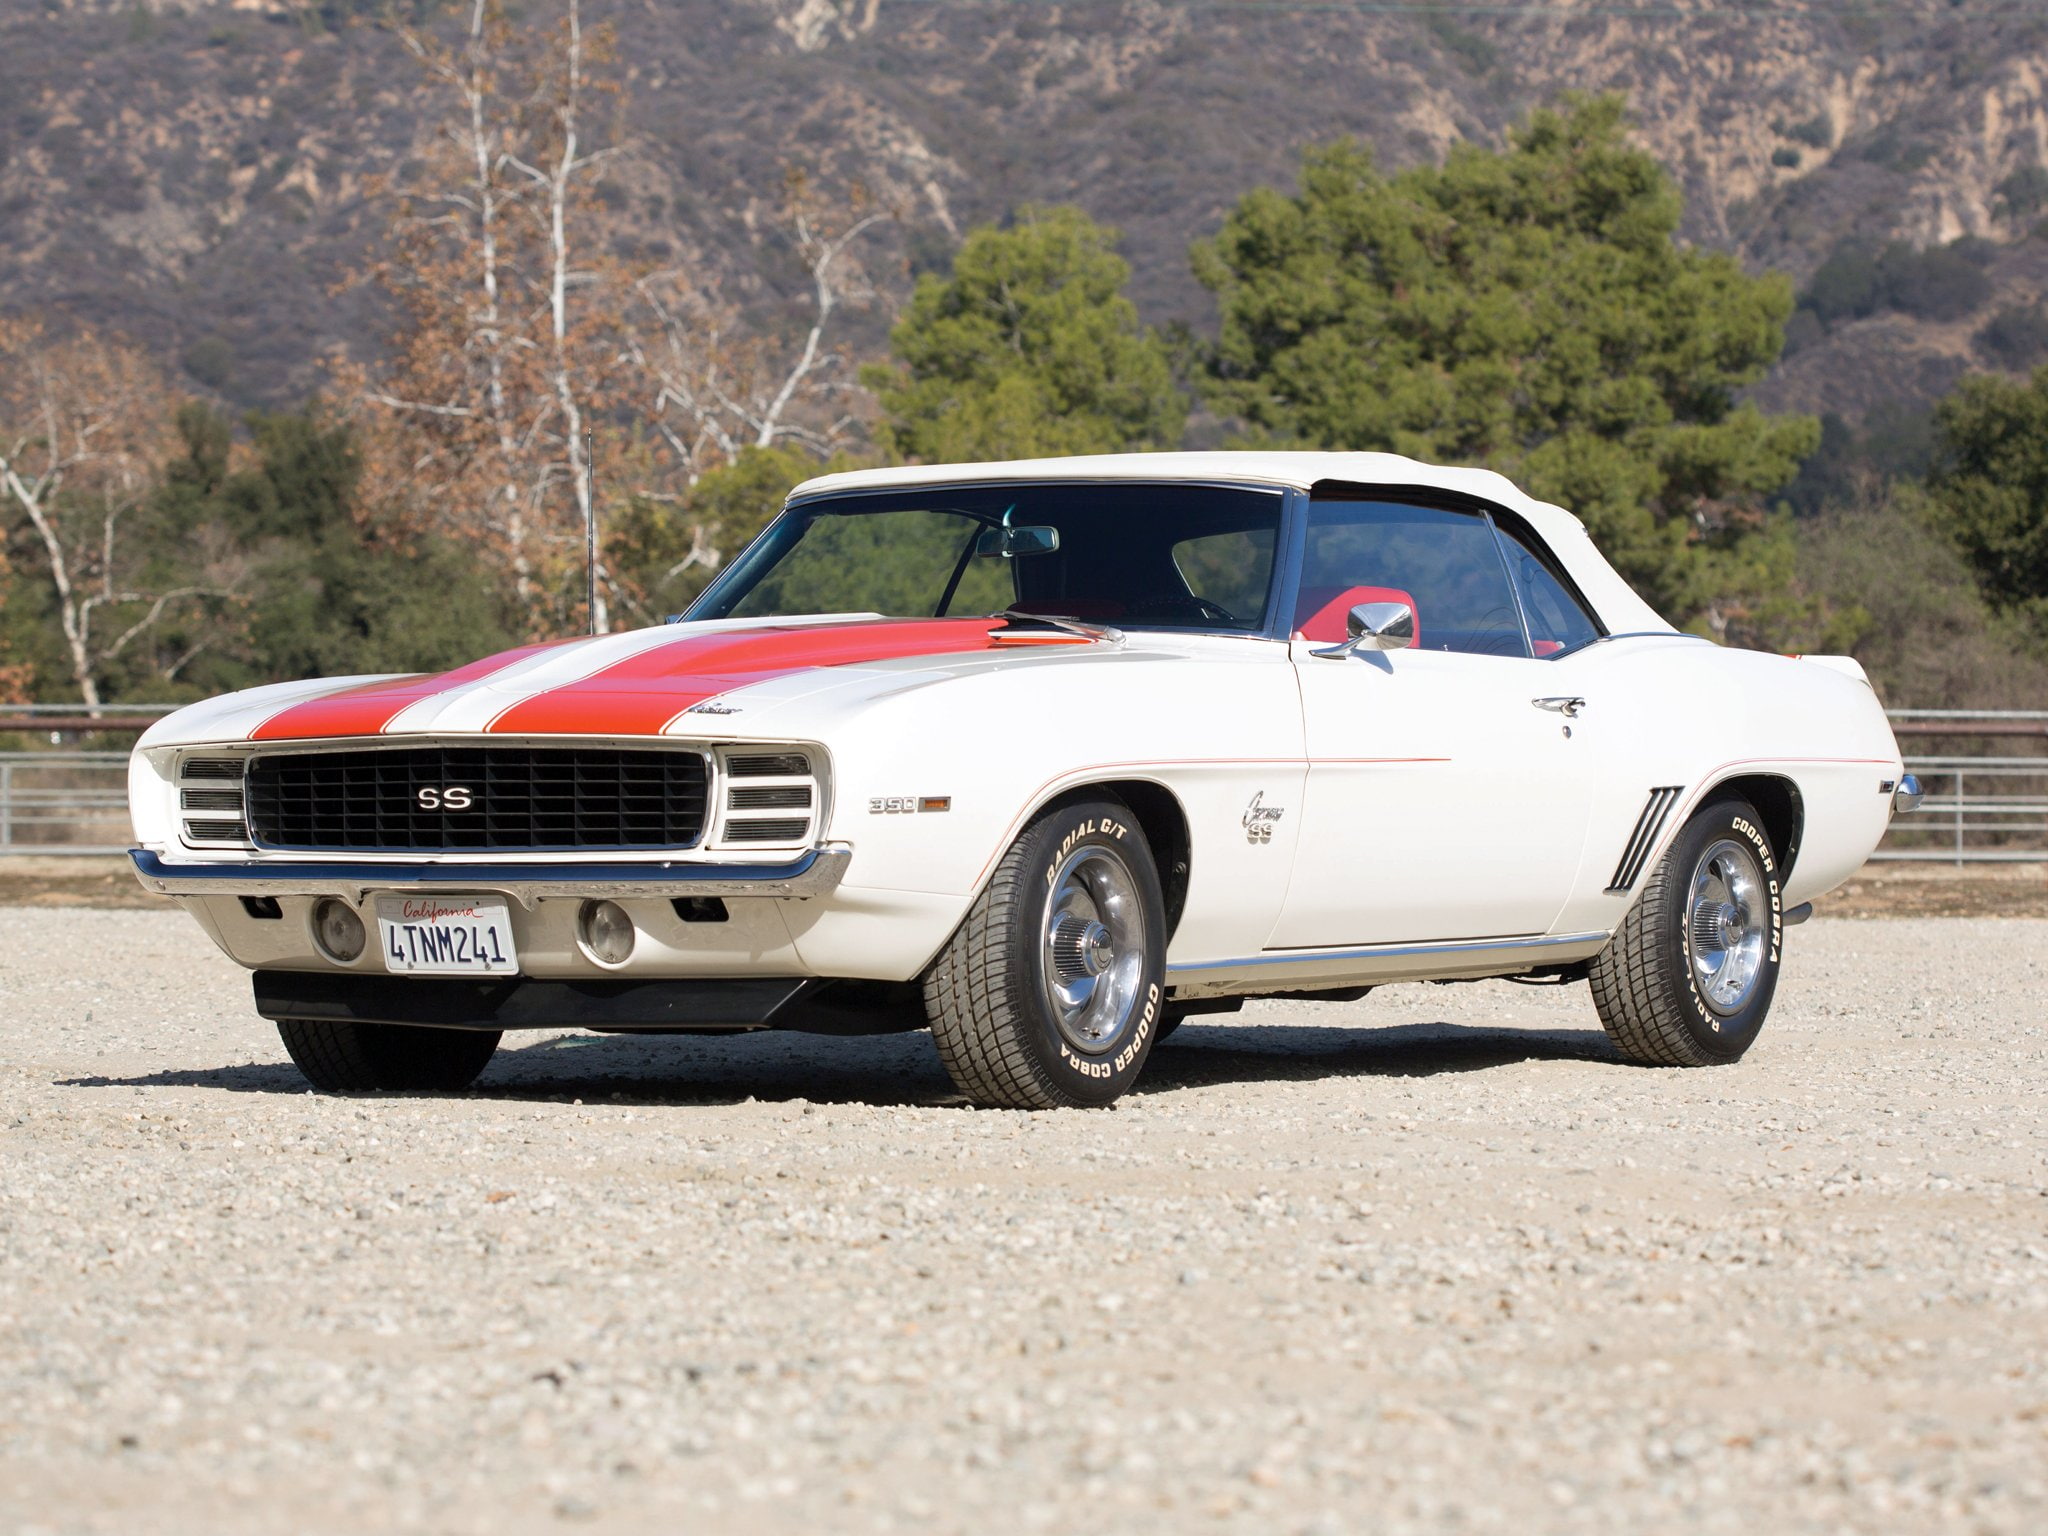 1969, 350, 500, camaro, chevrolet, convertible, indy, muscle